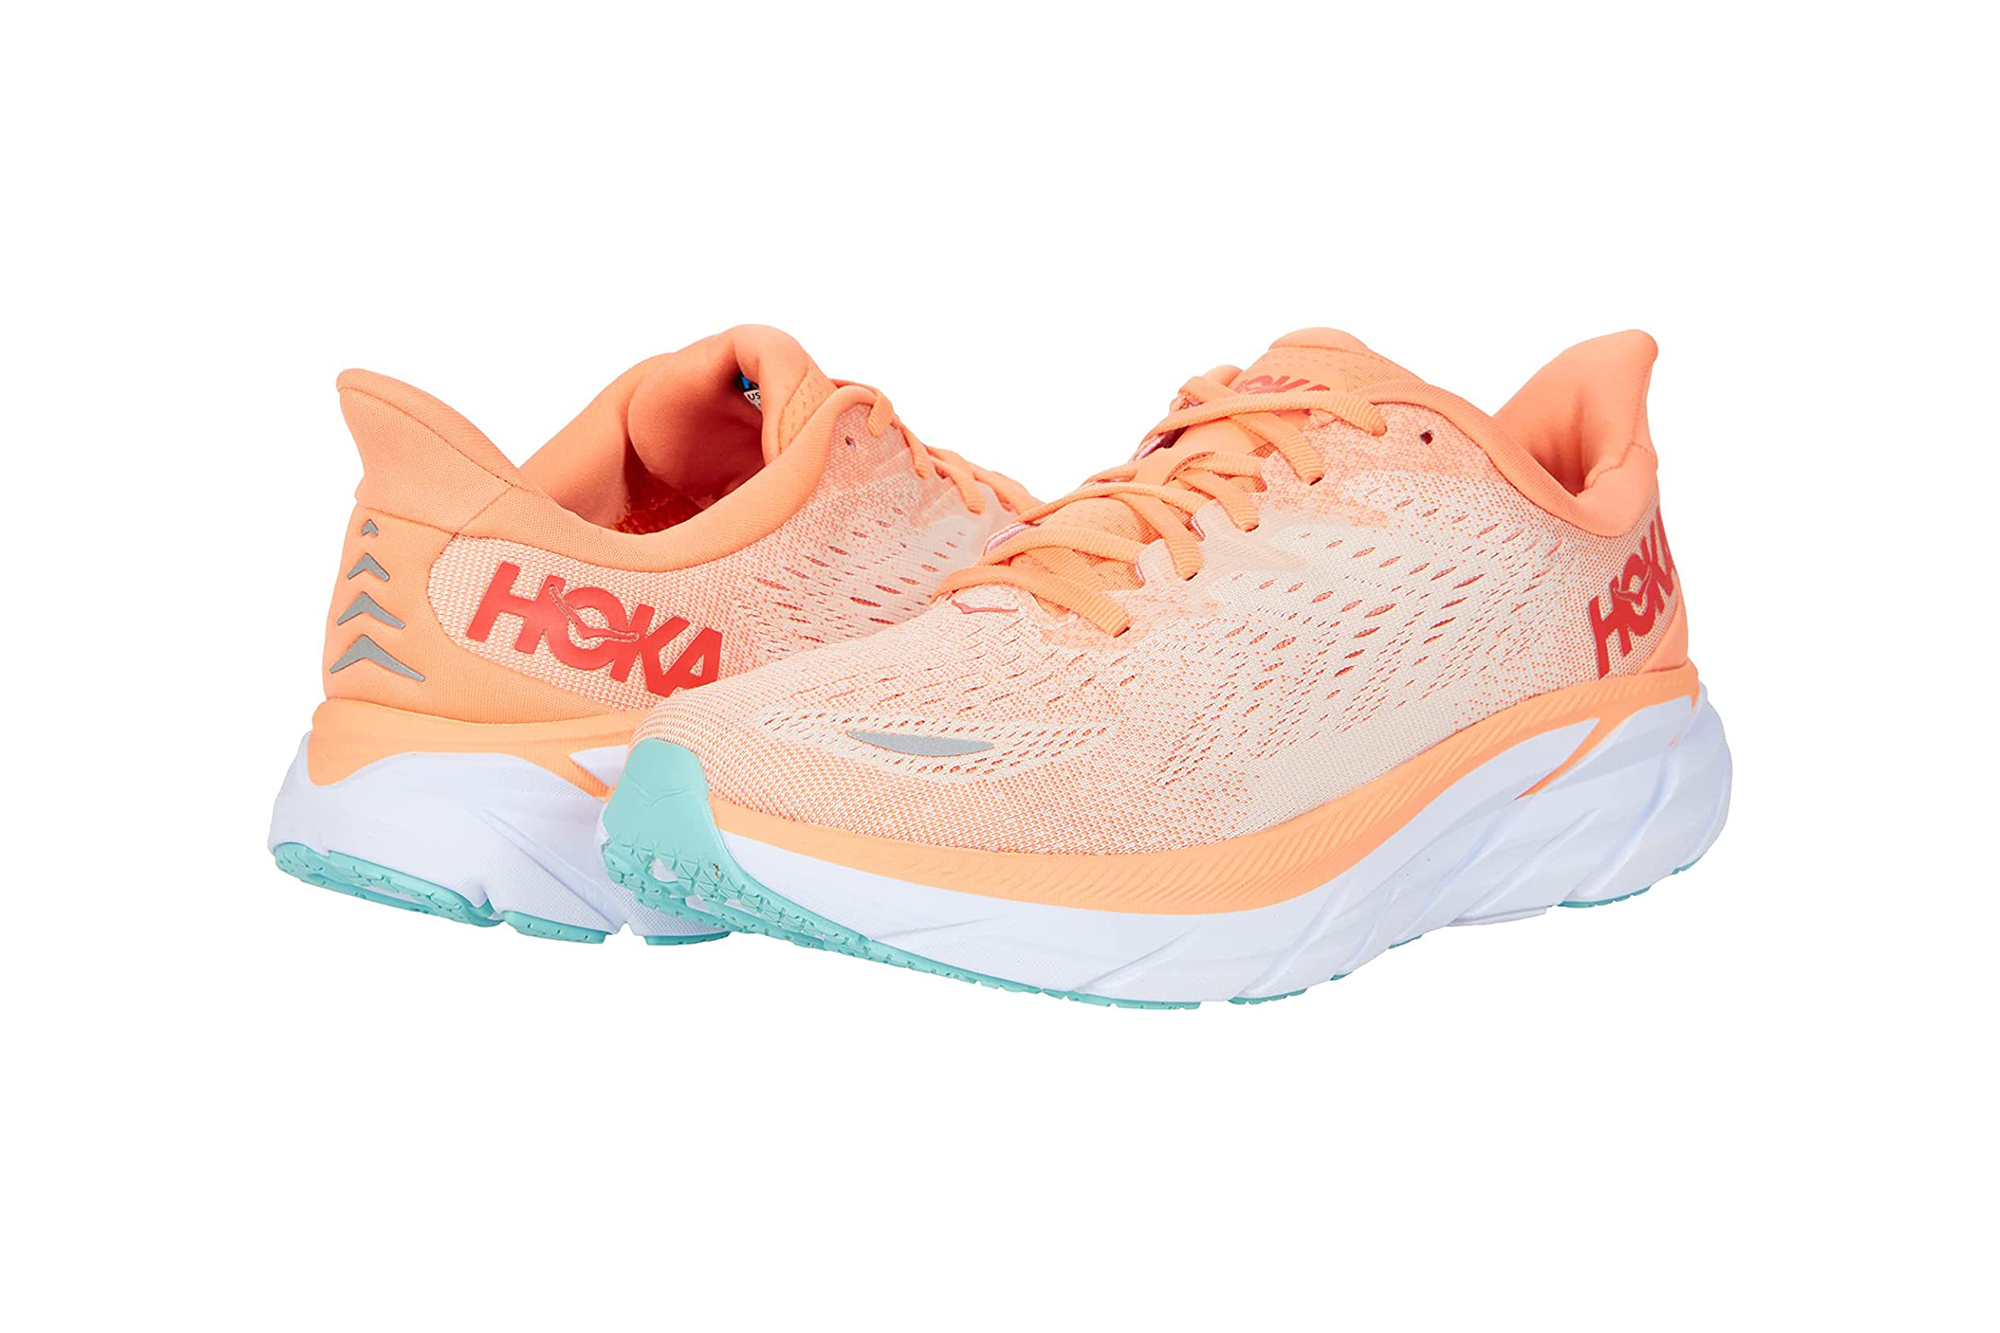 Run, Don't Walk in These Comfy Hoka Running Shoes — On Sale